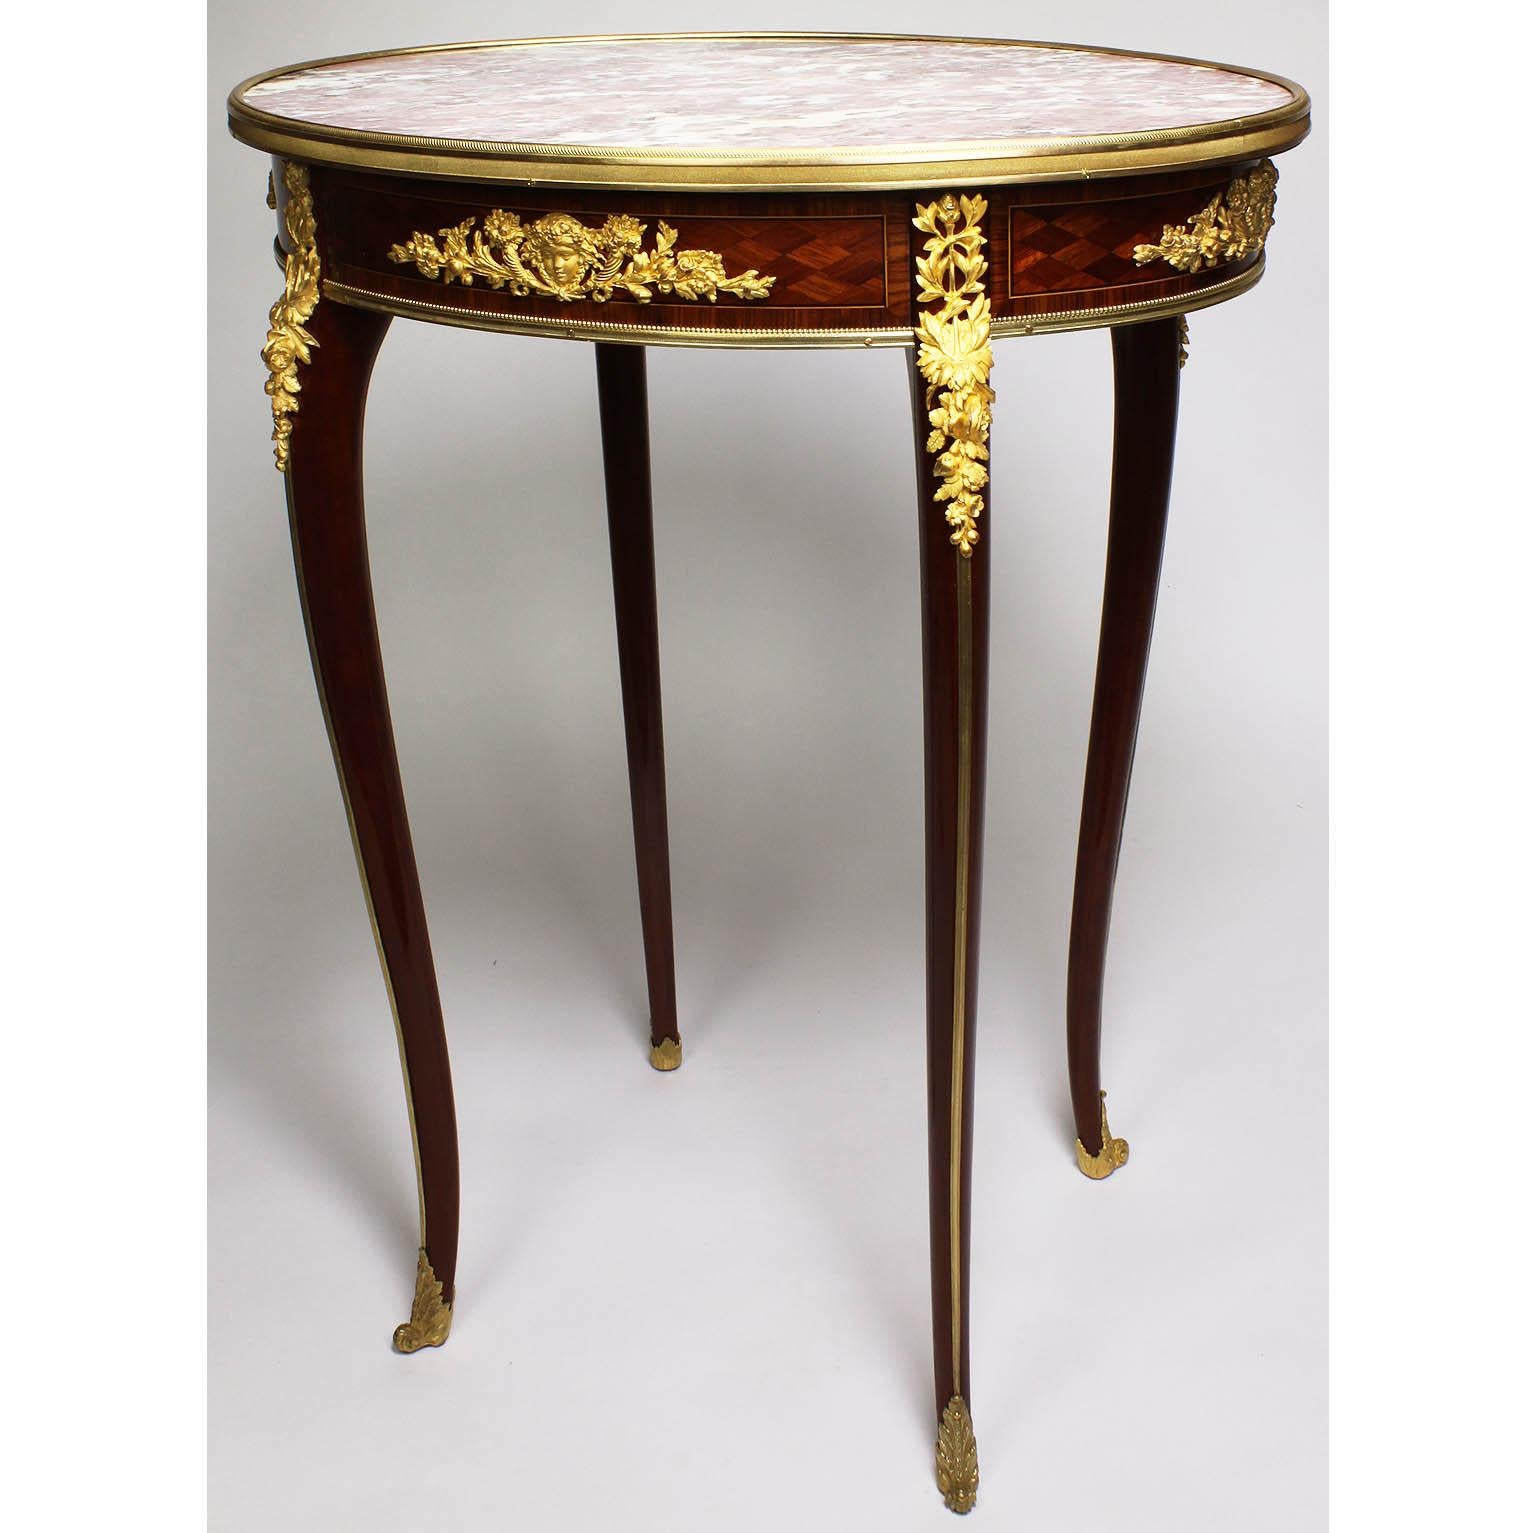 A fine French 19th century gilt-bronze (Ormolu) mounted, mahogany and tulipwood marquetry oval Gueridon (side) table with marble top, attributed to François Linke (1855-1946). The inset ovoid brocatelle d'Espagne marble top above a lozenge parquetry